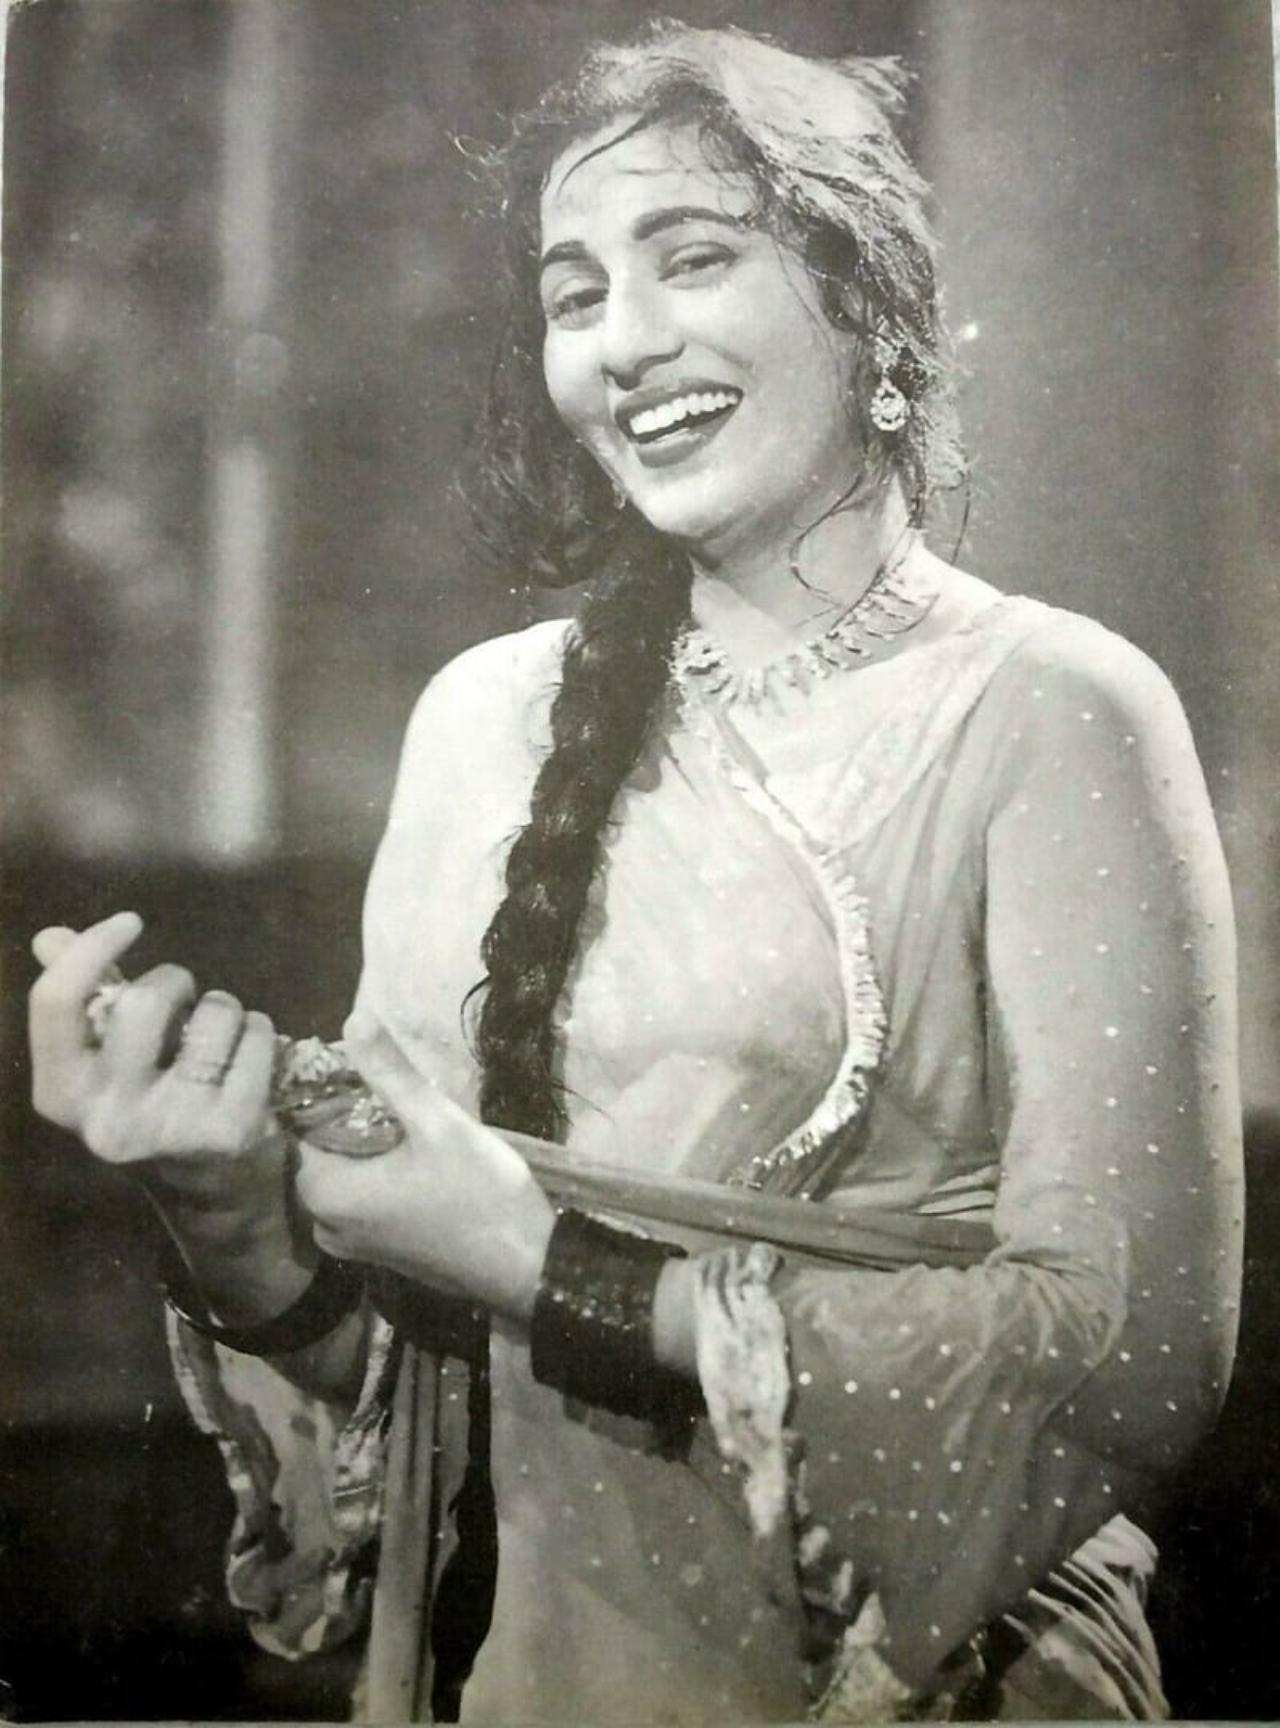 In her career spanning over 20 years, Madhubala featured in over 60 films and was one of the most in-demand actors and not just in India. The actress was renowed for her work beyond the boundaries of India. Through her career, Madhubala has starred in films like 'Neel Kamal', 'Mahal', 'Hanste Ansu', 'Mr. Has', 'Mrs. 55', 'Kaala Paani', 'Howrah Bridge', 'Chalati Ka Naam Gaadi'. And yes, how can one forget 'Mughal-e-Azam'